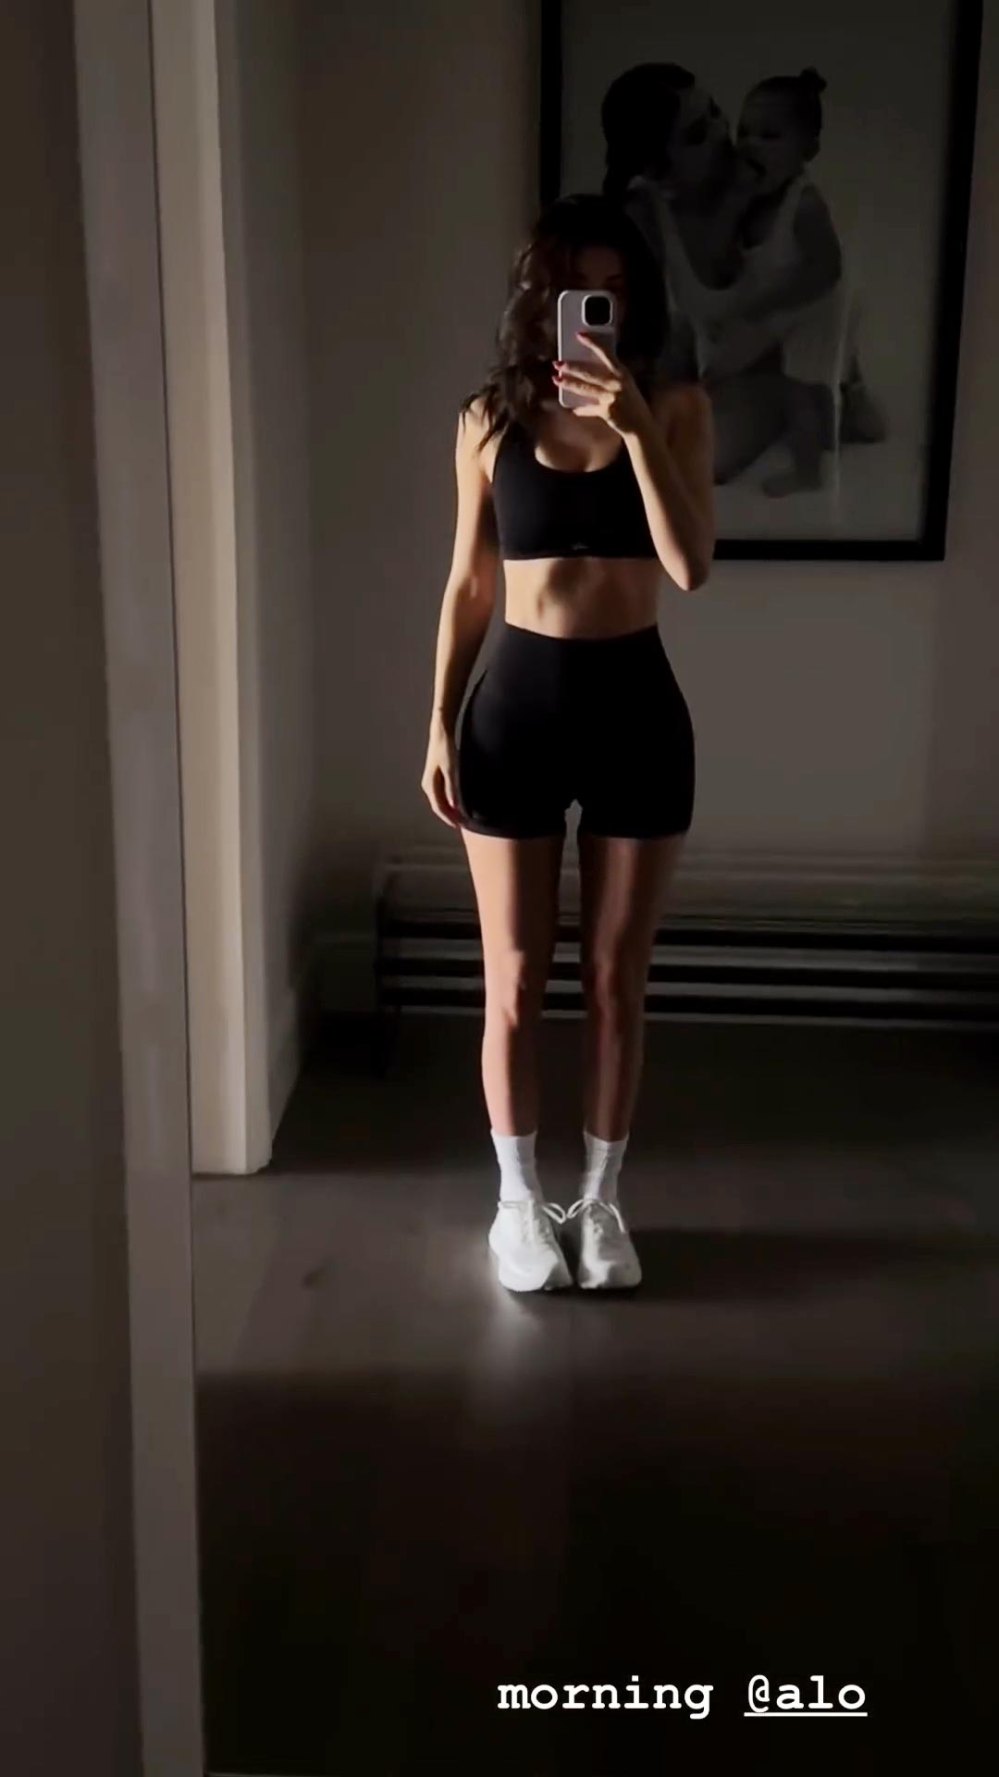 Kendall Jenner shows off her tiny figure in sports bra and